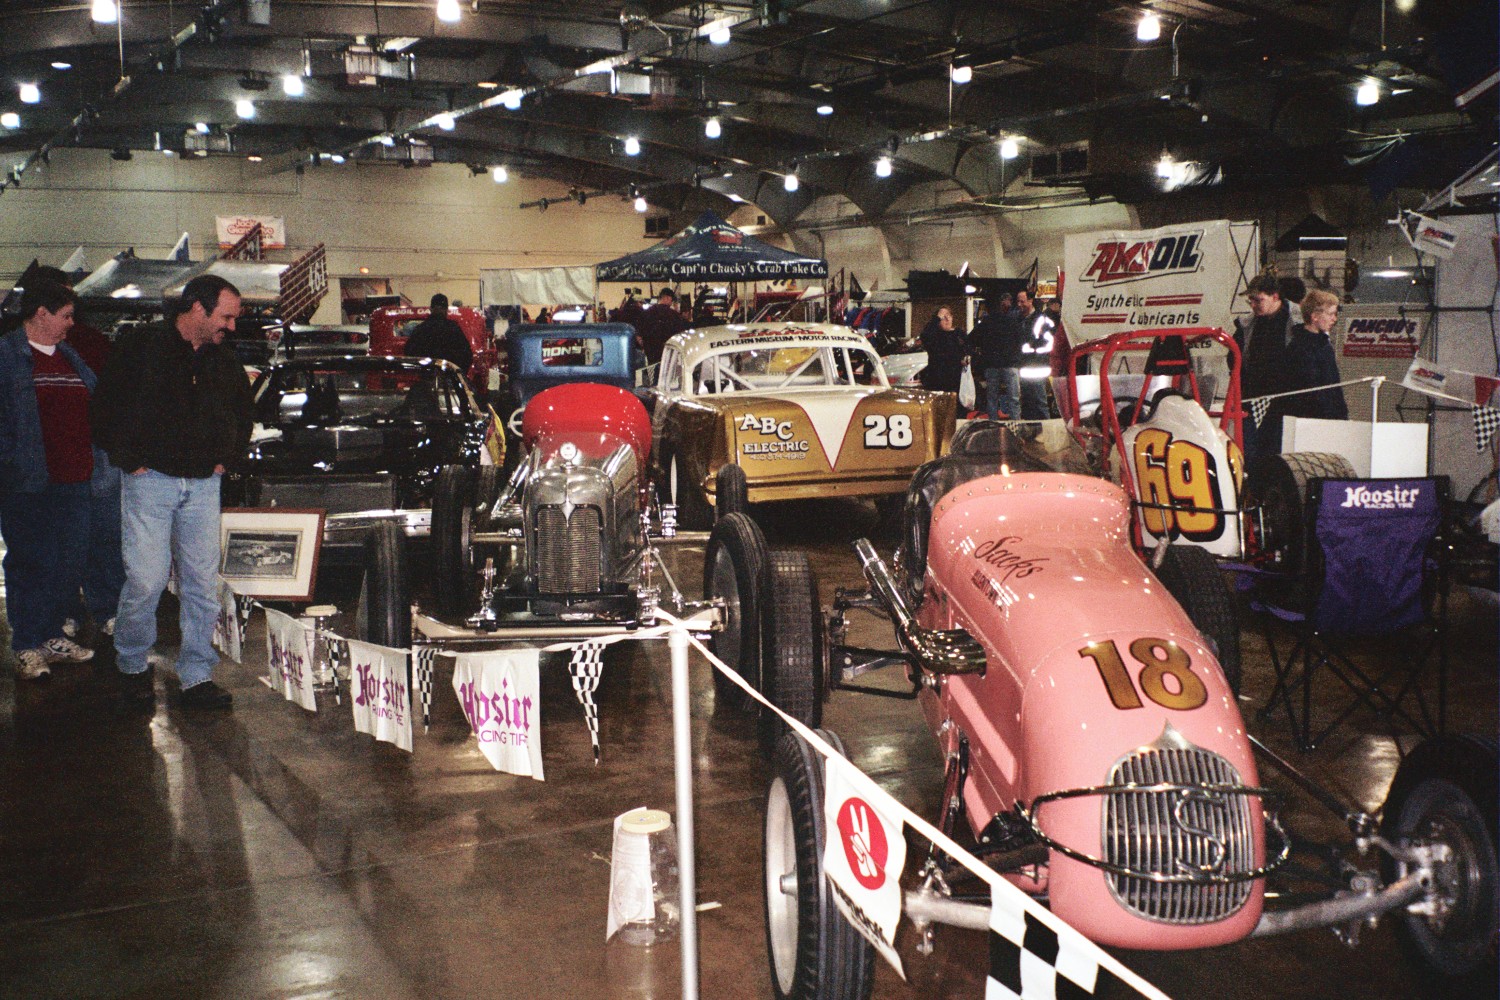 Lot of vehicles on display at the 2006 show...
